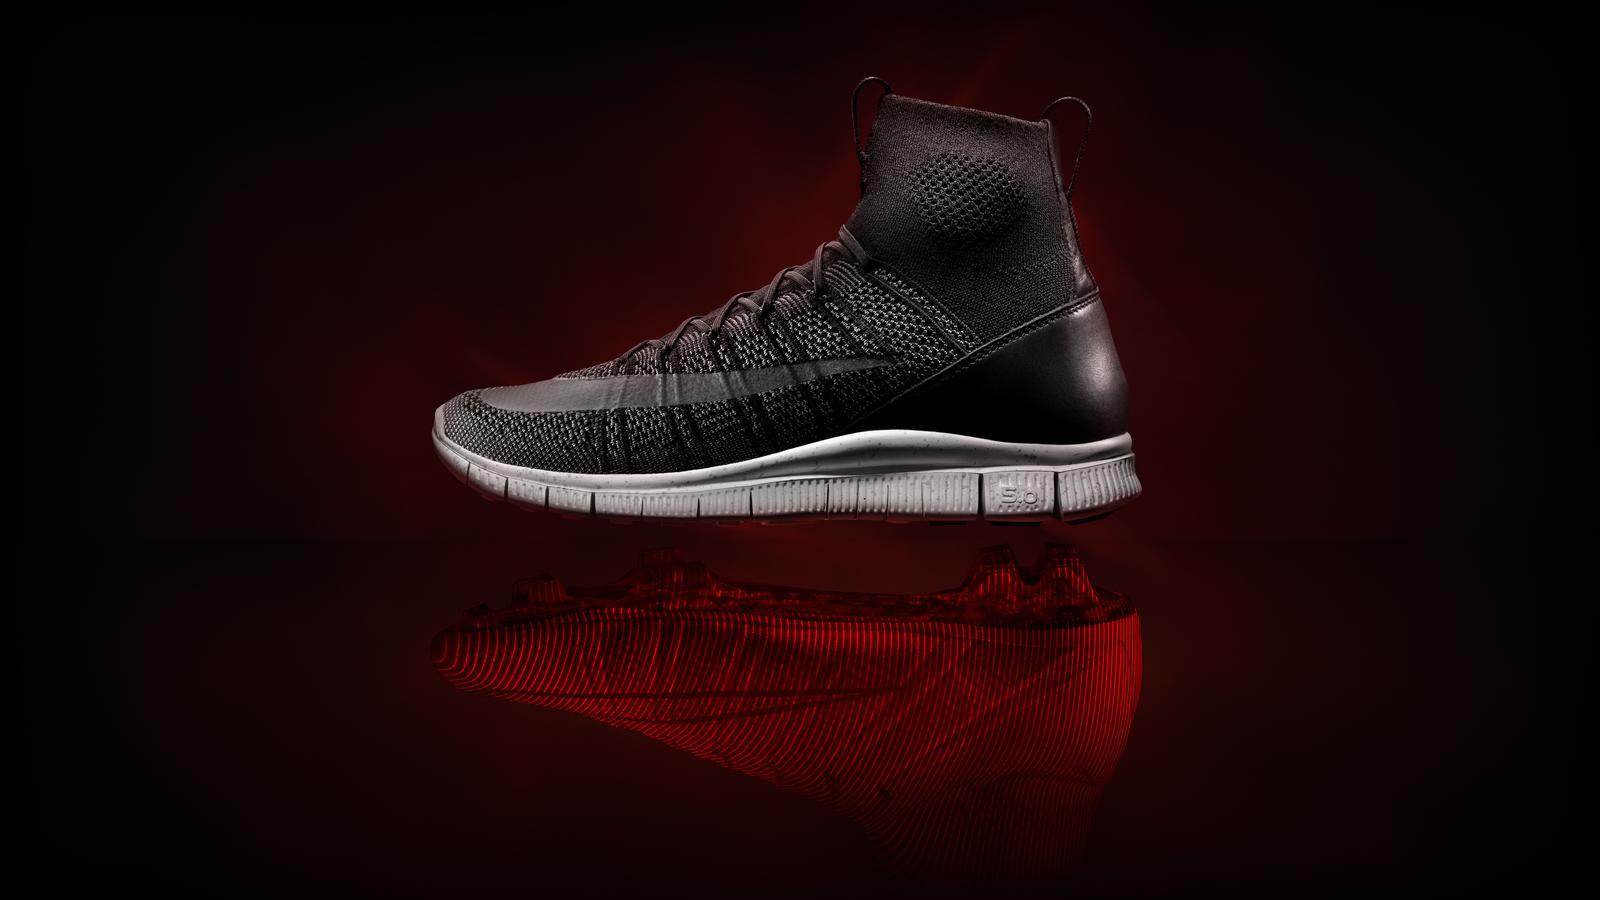 The Free Mercurial Superfly